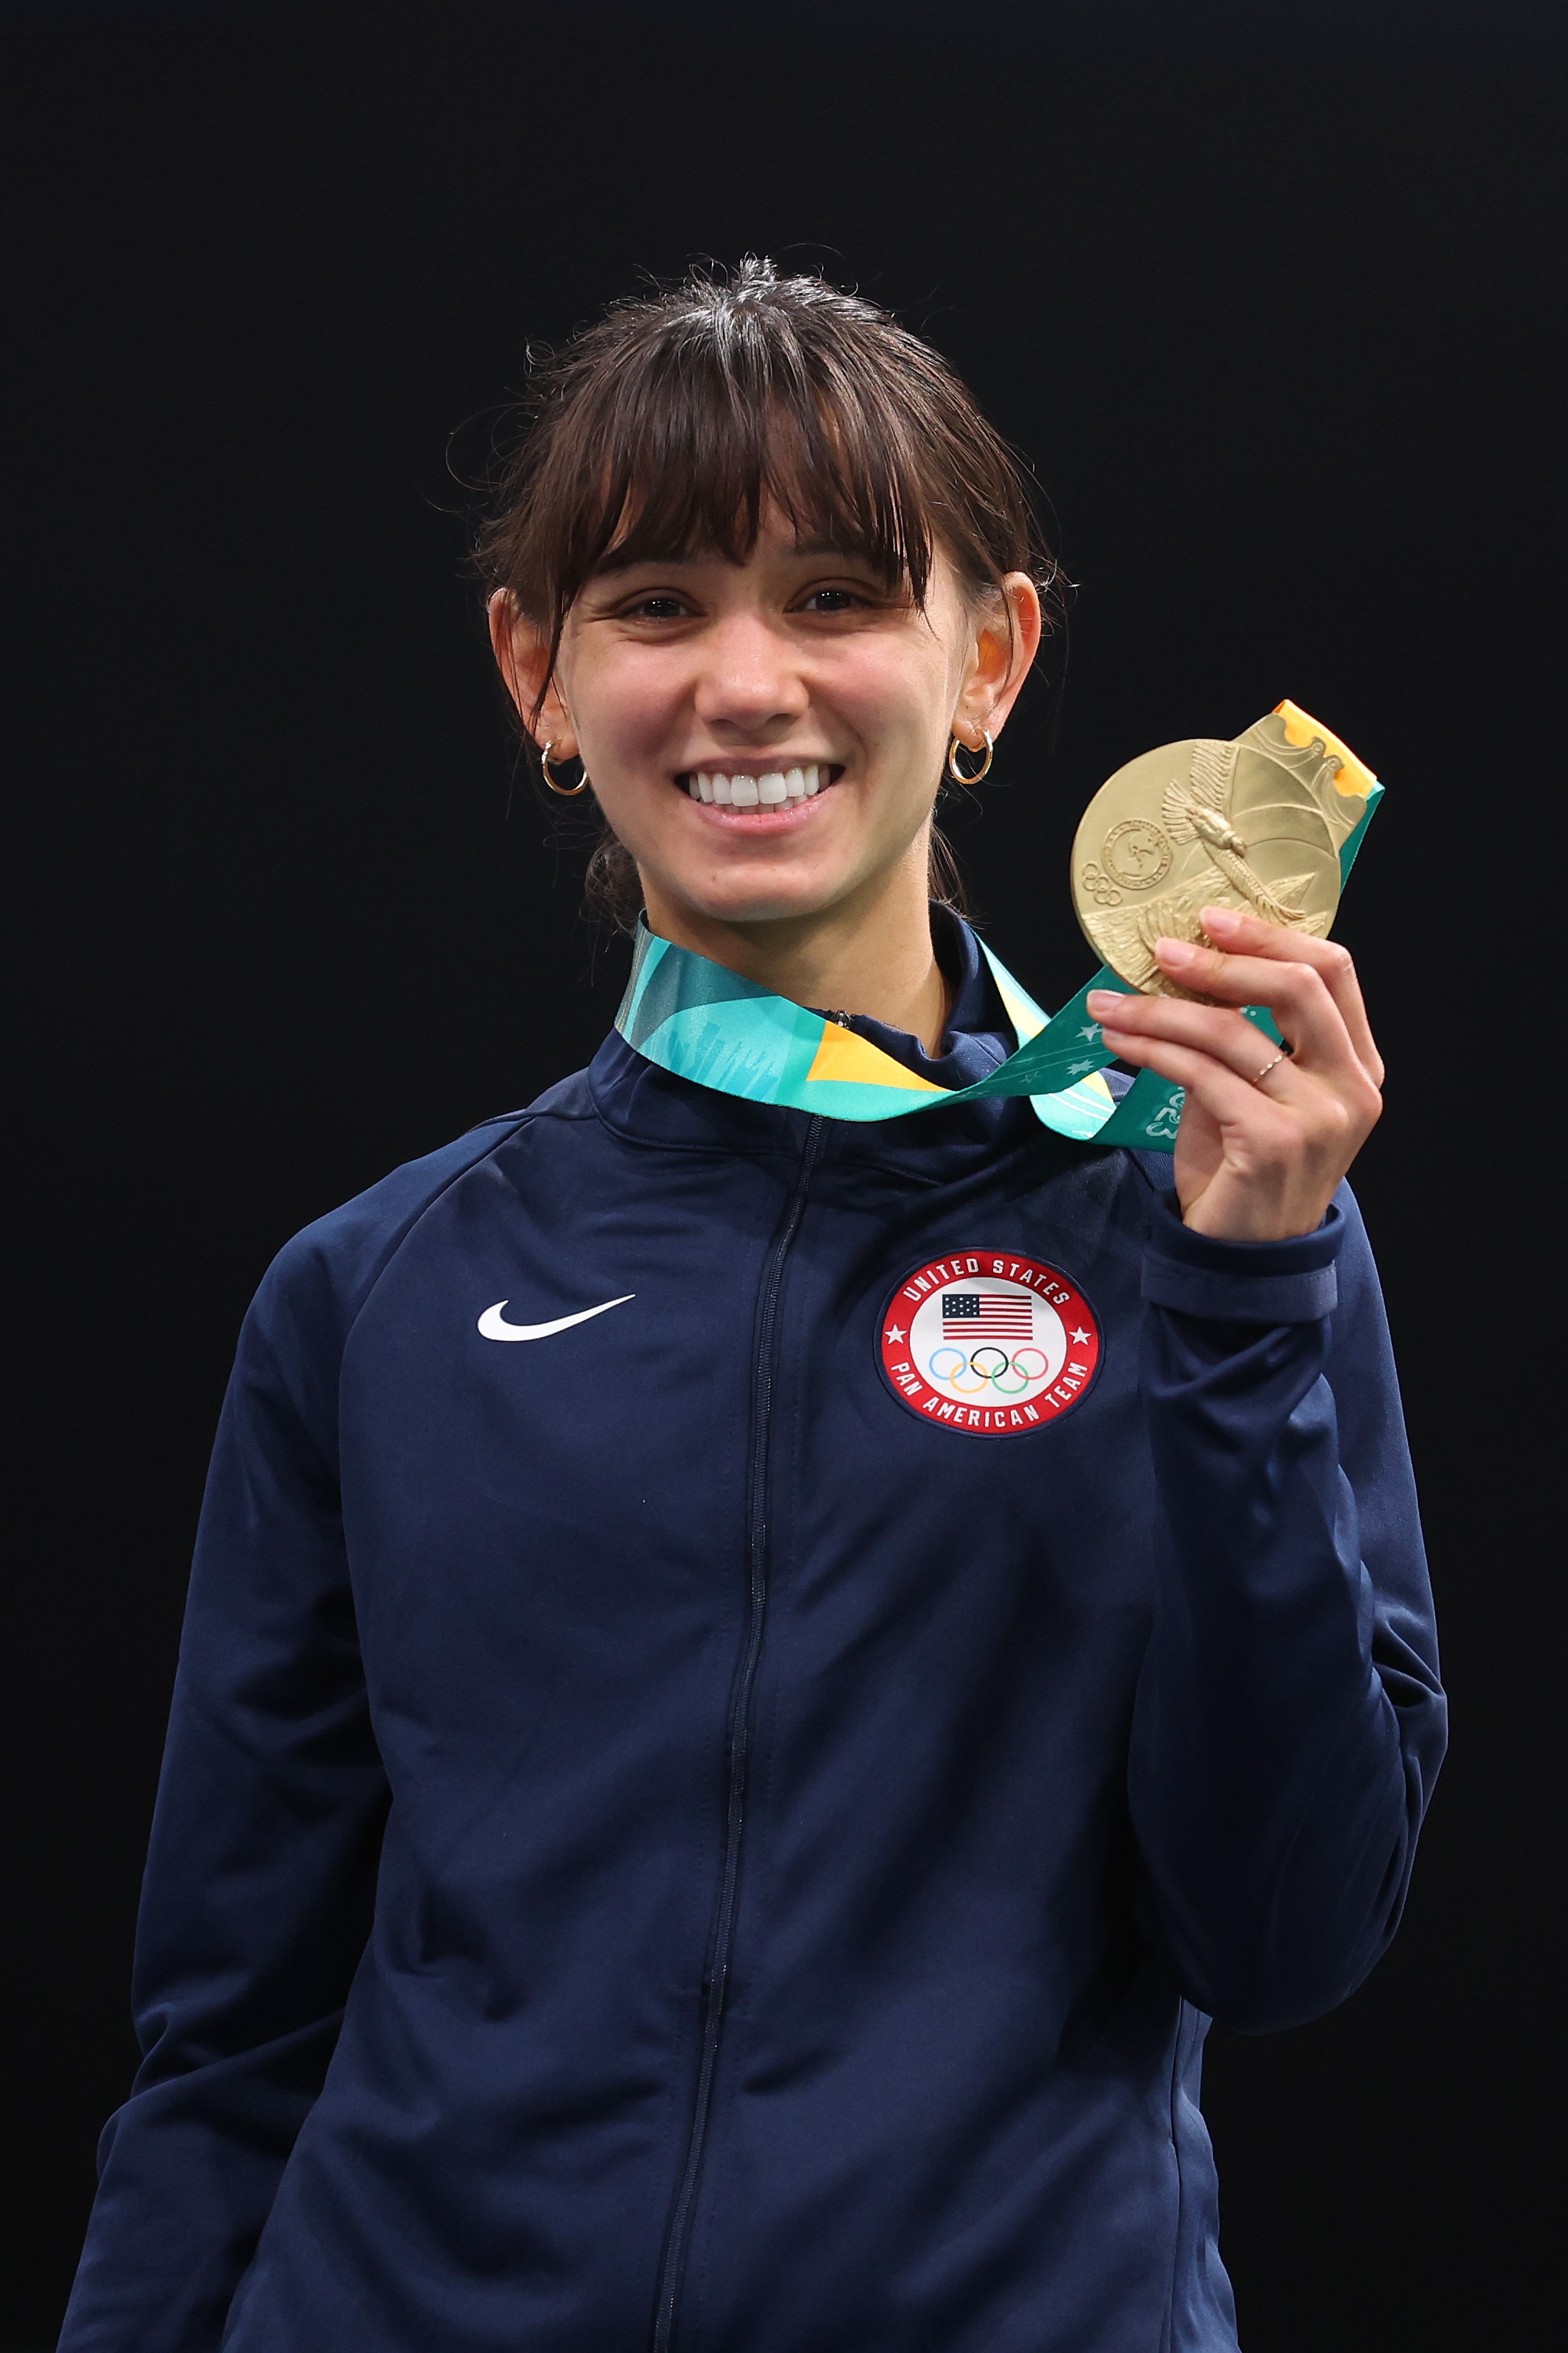 <p>What can be said about Lee Kiefer that hasn't already been addressed? According to <strong><a href="https://www.teamusa.com/profiles/lee-kiefer-807038">Team USA</a></strong>, she's fenced since she was five years old and became the youngest person to join the U.S. Senior World Foil Team in 2009. She also became the first woman from the U.S. to earn the top foil ranking spot in 2017. </p><p>Between 2012 and 2020, Lee scored big during several Olympics, even landing a gold medal as a result. It's safe to say we're confident she's also going to achieve great things during the 2024 Summer Olympics. </p>